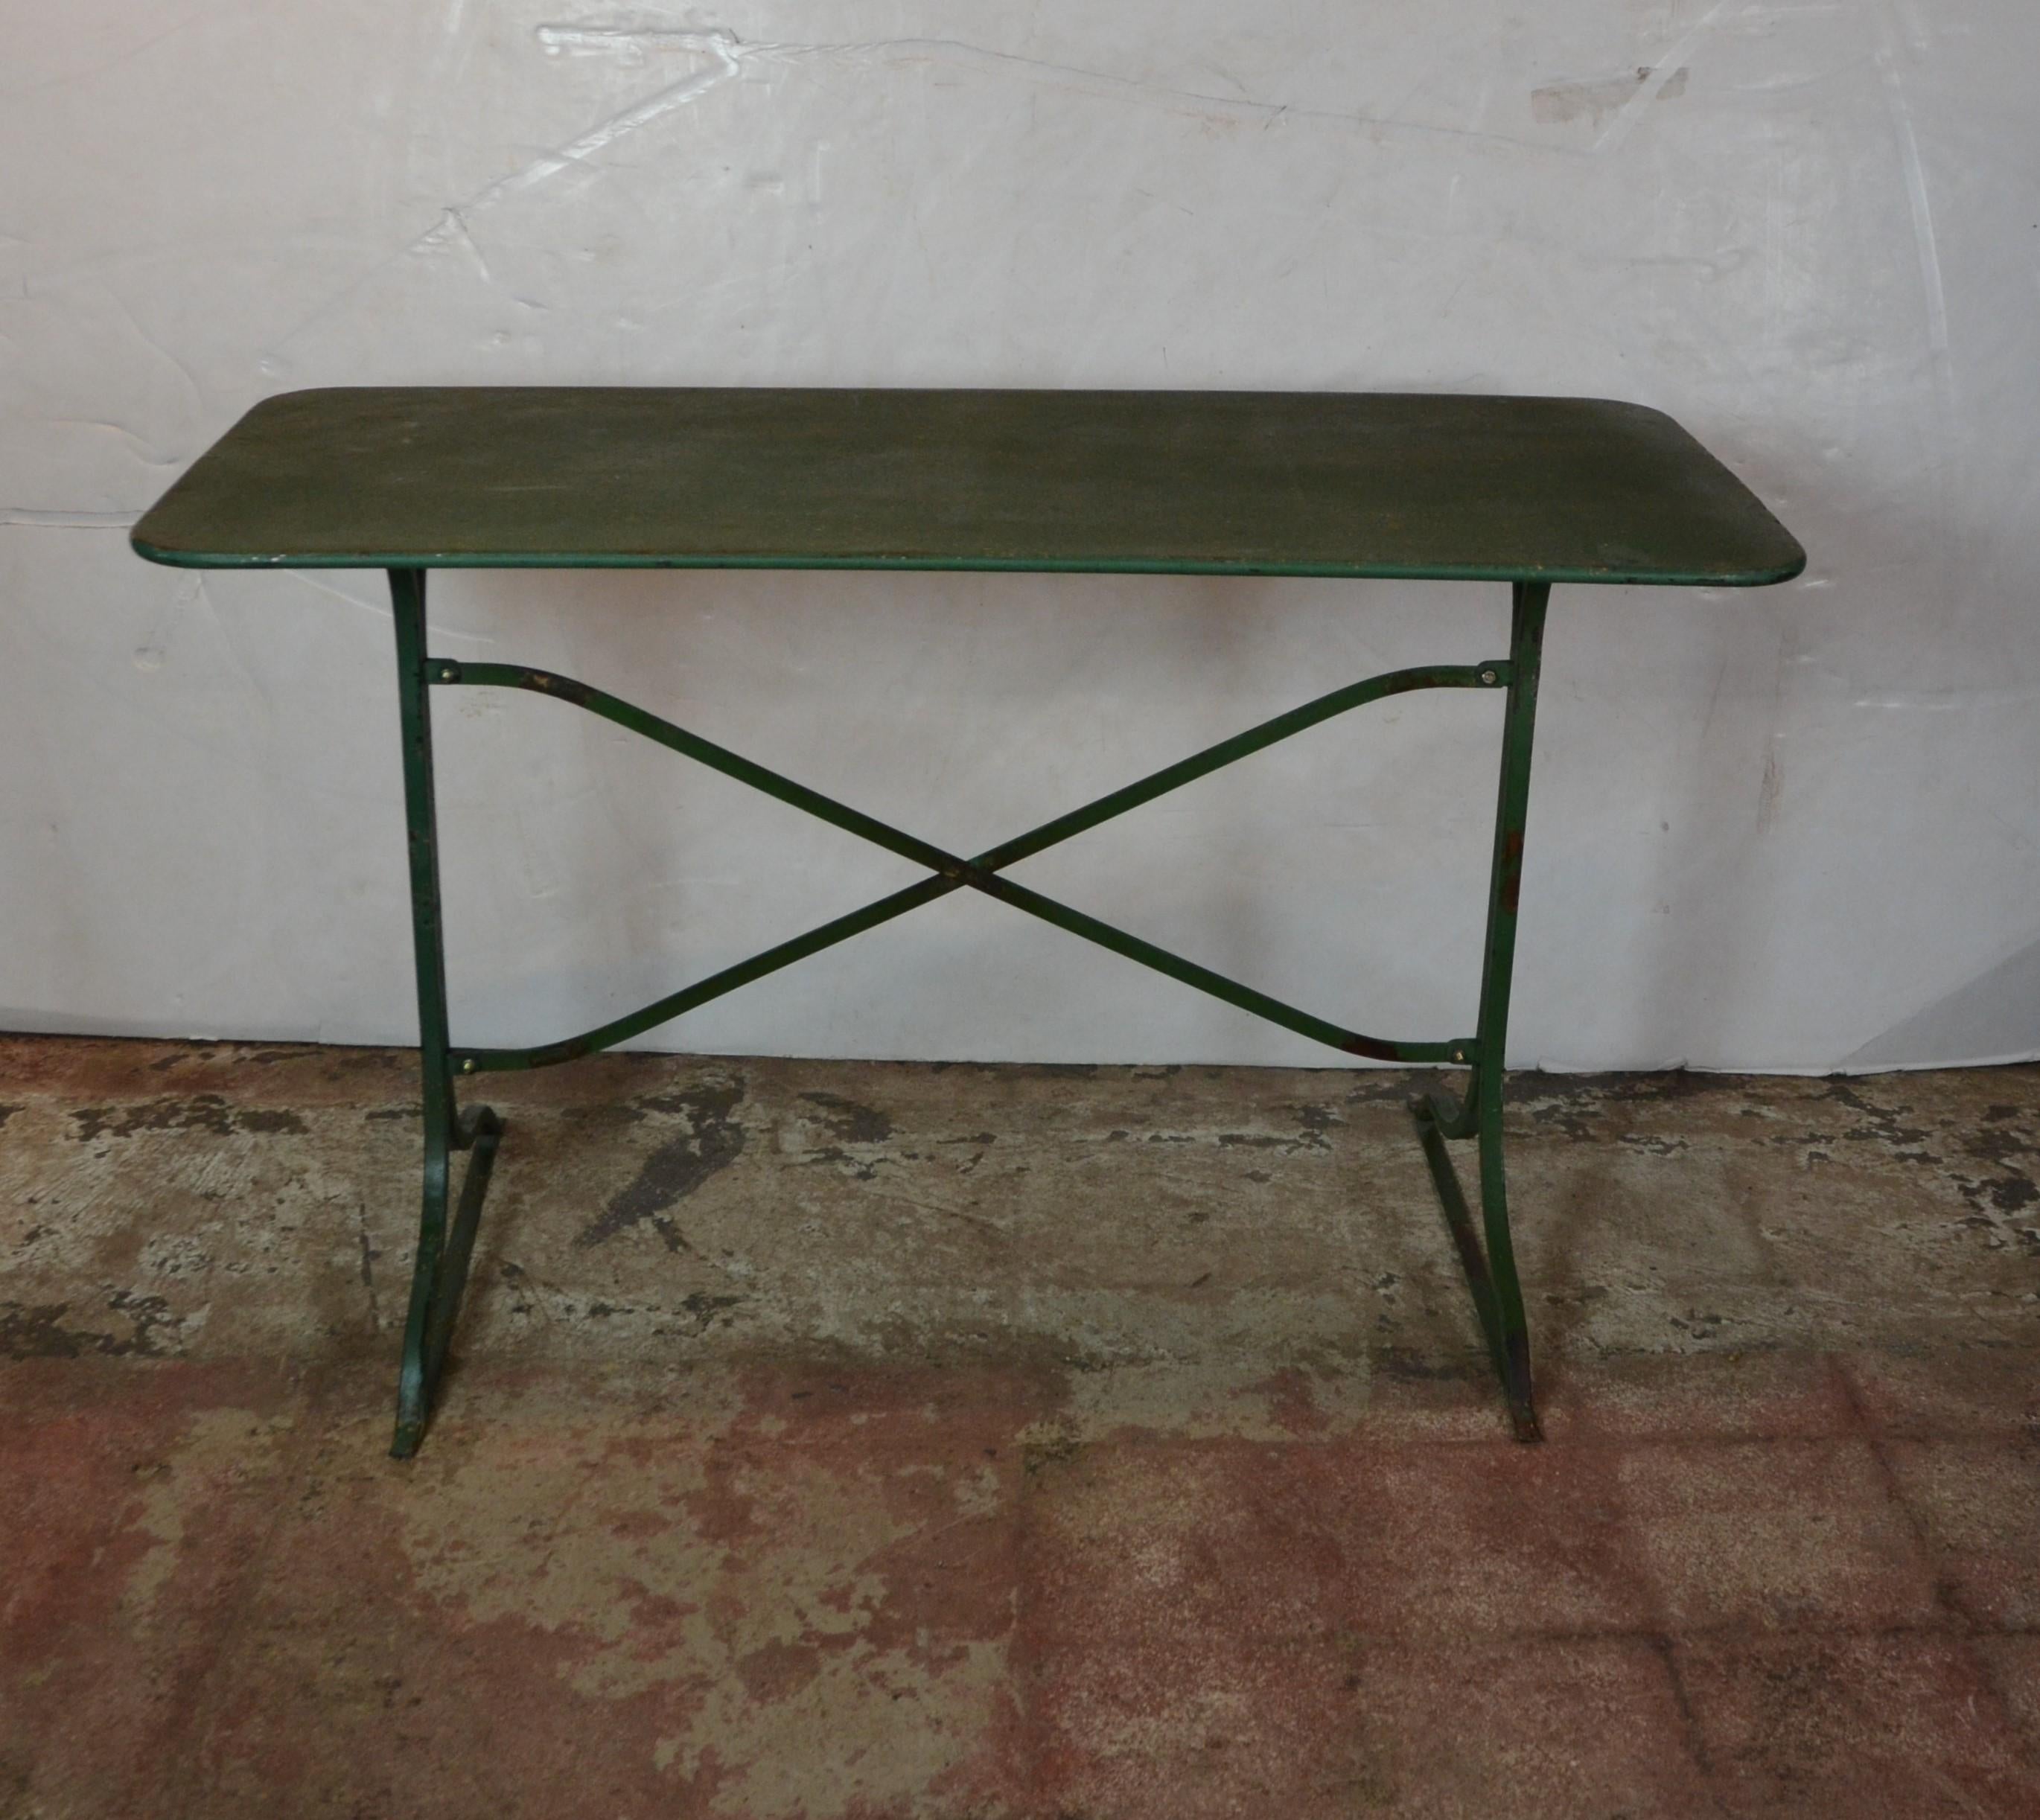 Elegantly fluted cast metal double-pedestal base with steel supports and nicely aged original green paint finish.